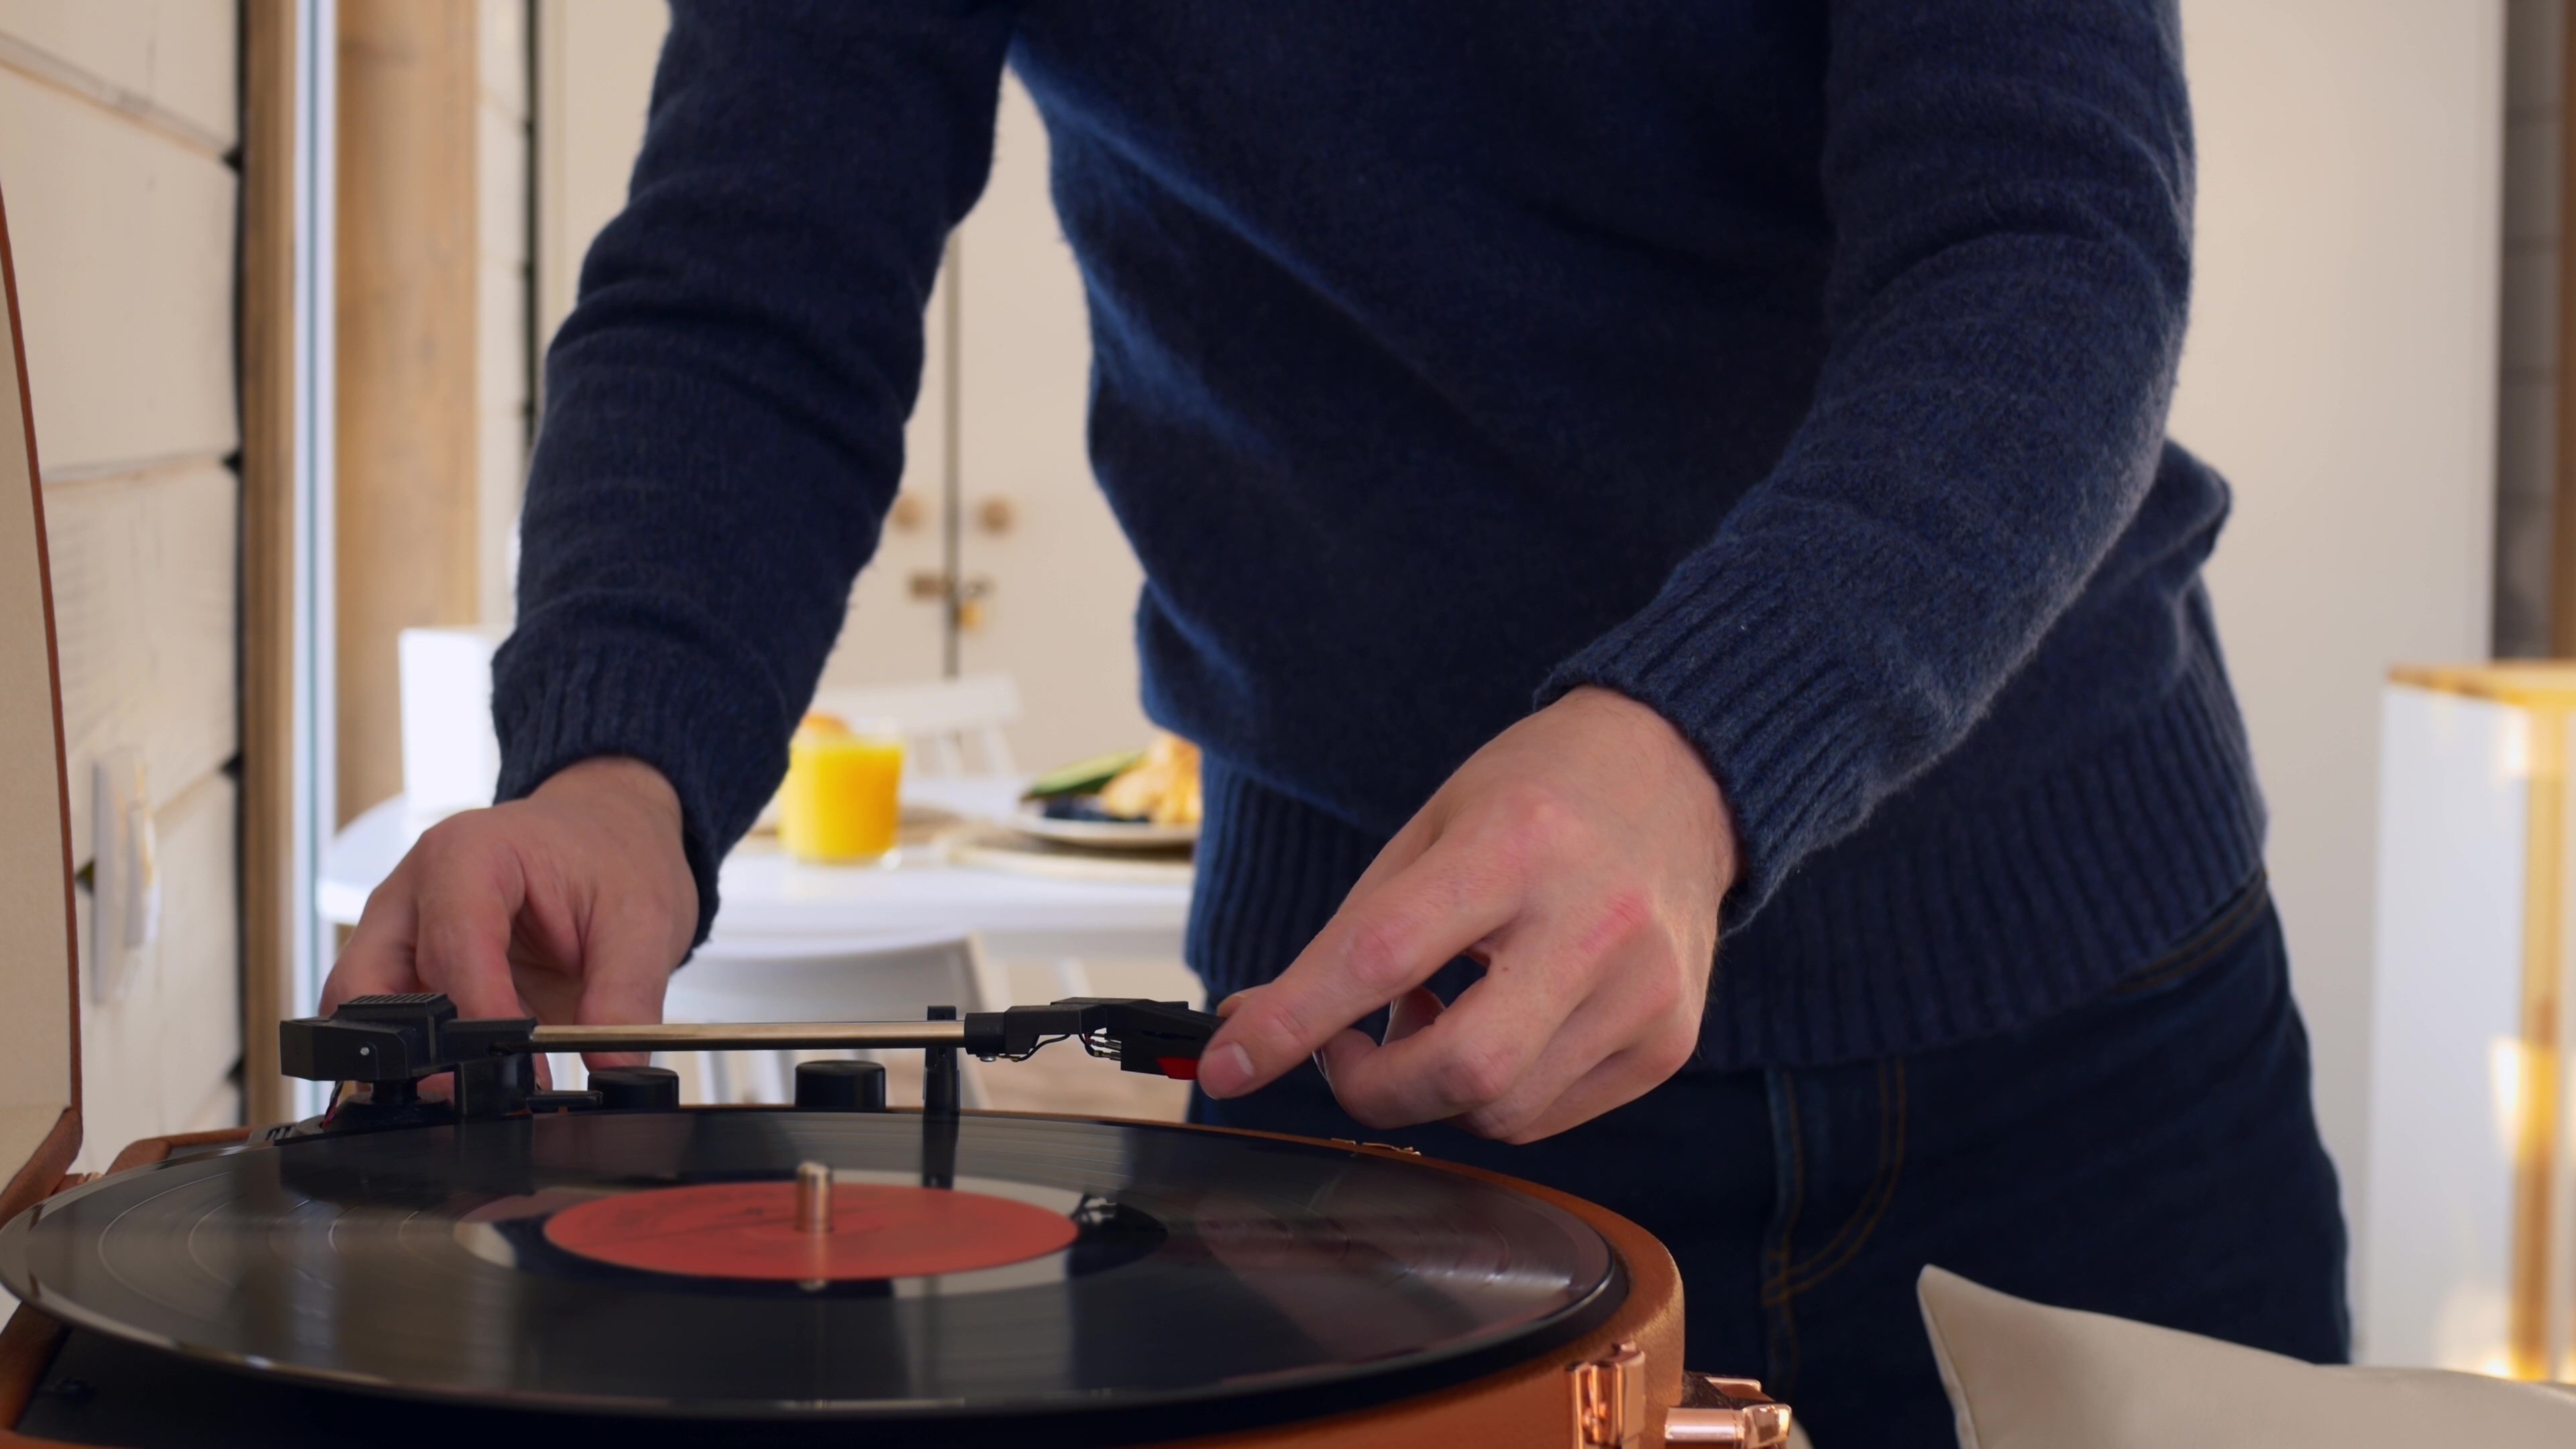 An excellent host puts a record on the turntable for his guests during Thanksgiving dinner.